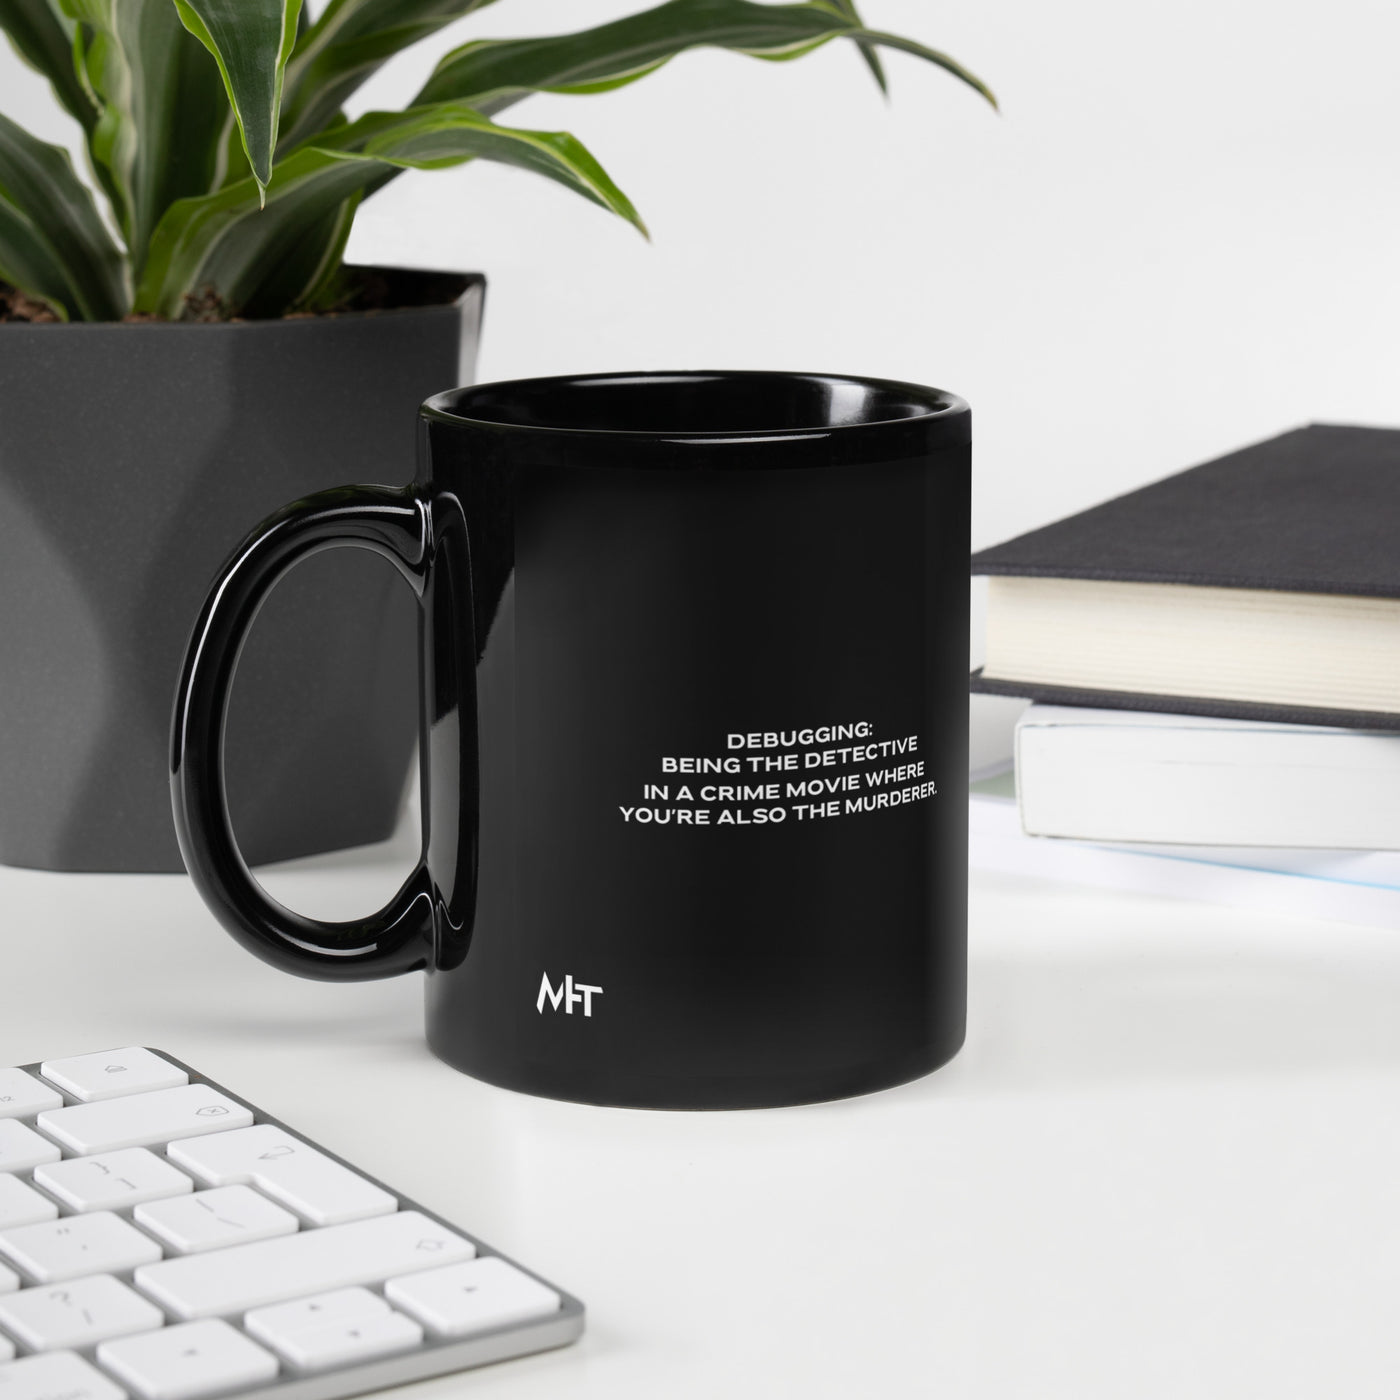 Debugging Being the detective in a crime movie where you are also the murderer V1 - Black Glossy Mug